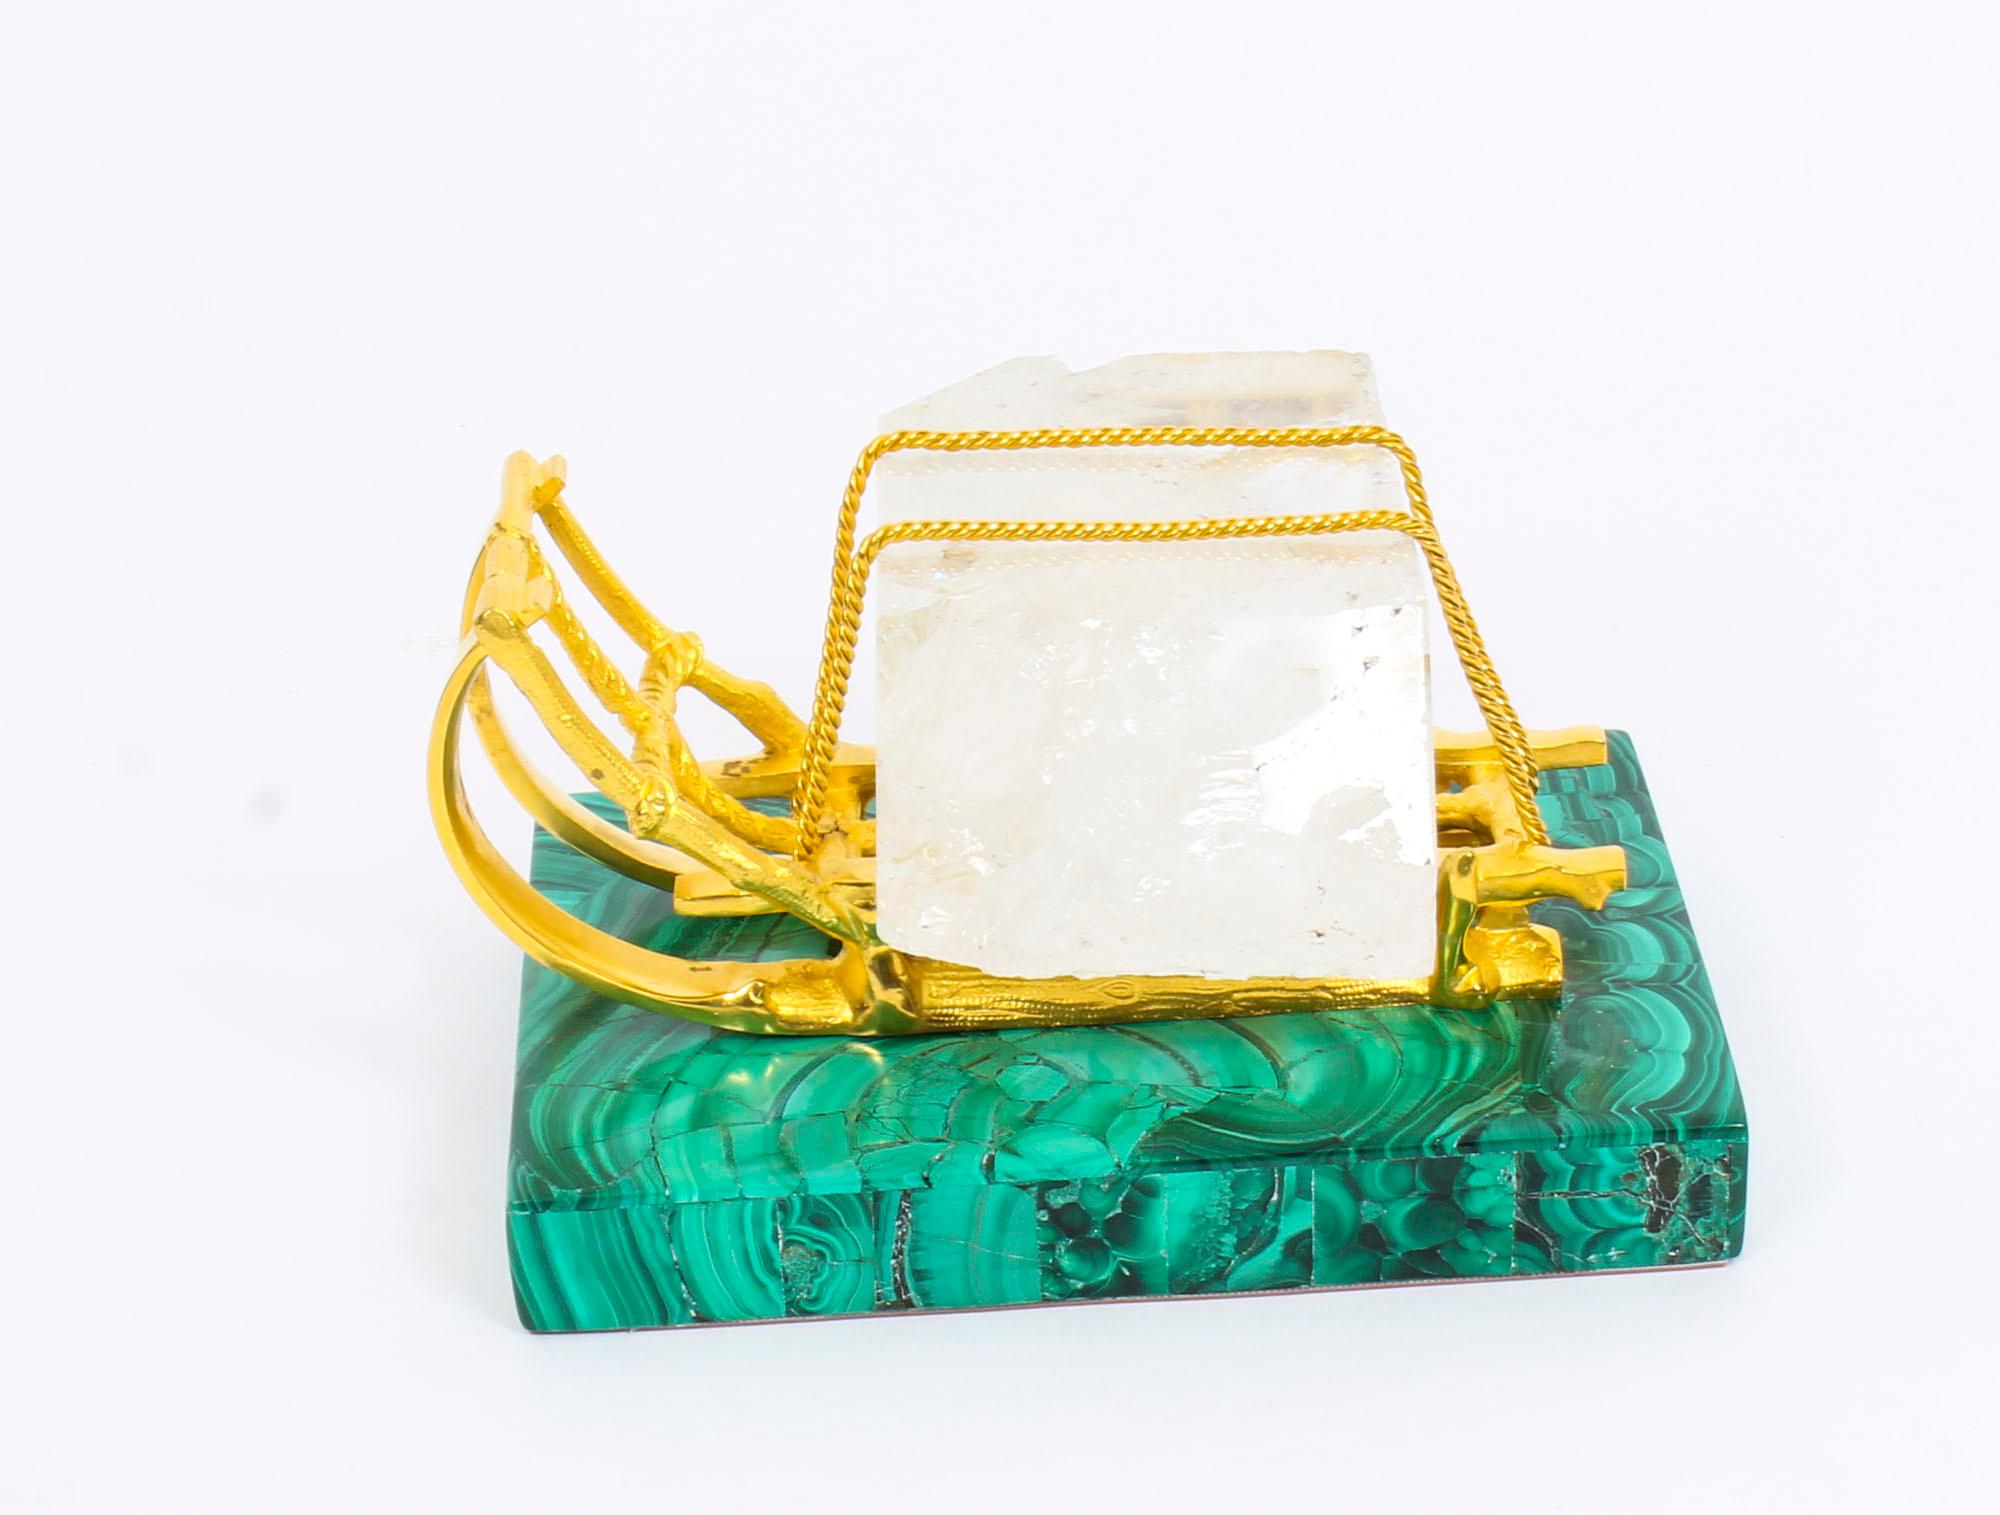 This is a truly magnificent and rare antique Russian gilt bronze, malachite and rock crystal desk stand, circa 1870 in date.

This exceptionally executed desk stand is in the novelty form of a winter sleigh carrying a prestigious rectangular block